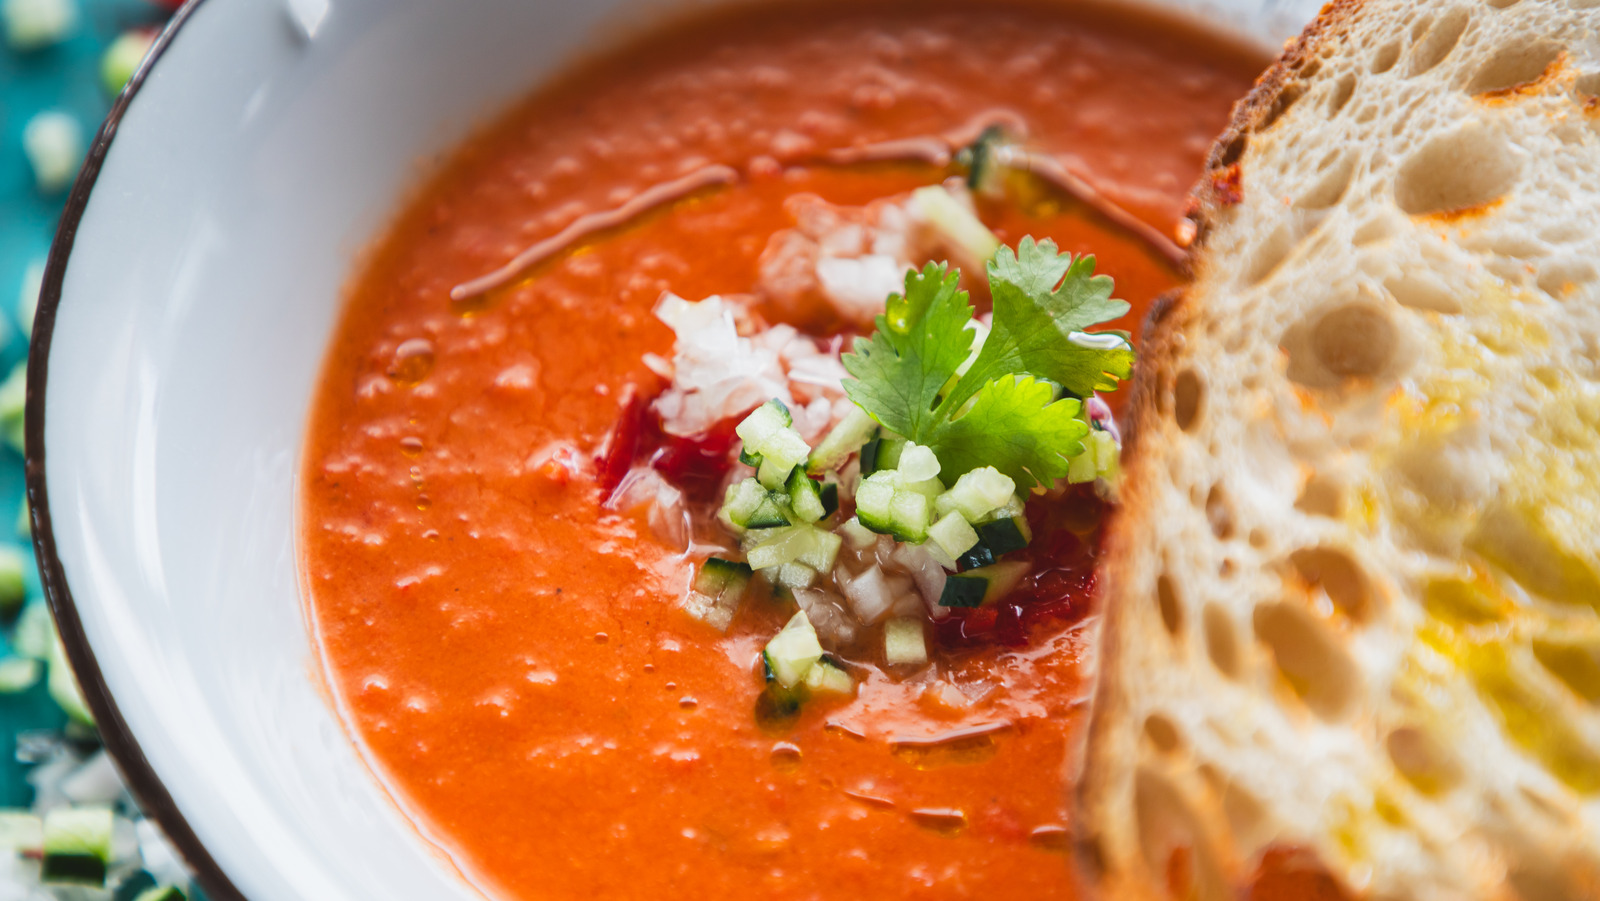 Orange Juice Is The Secret Ingredient That Takes Tomato Soup To The ...